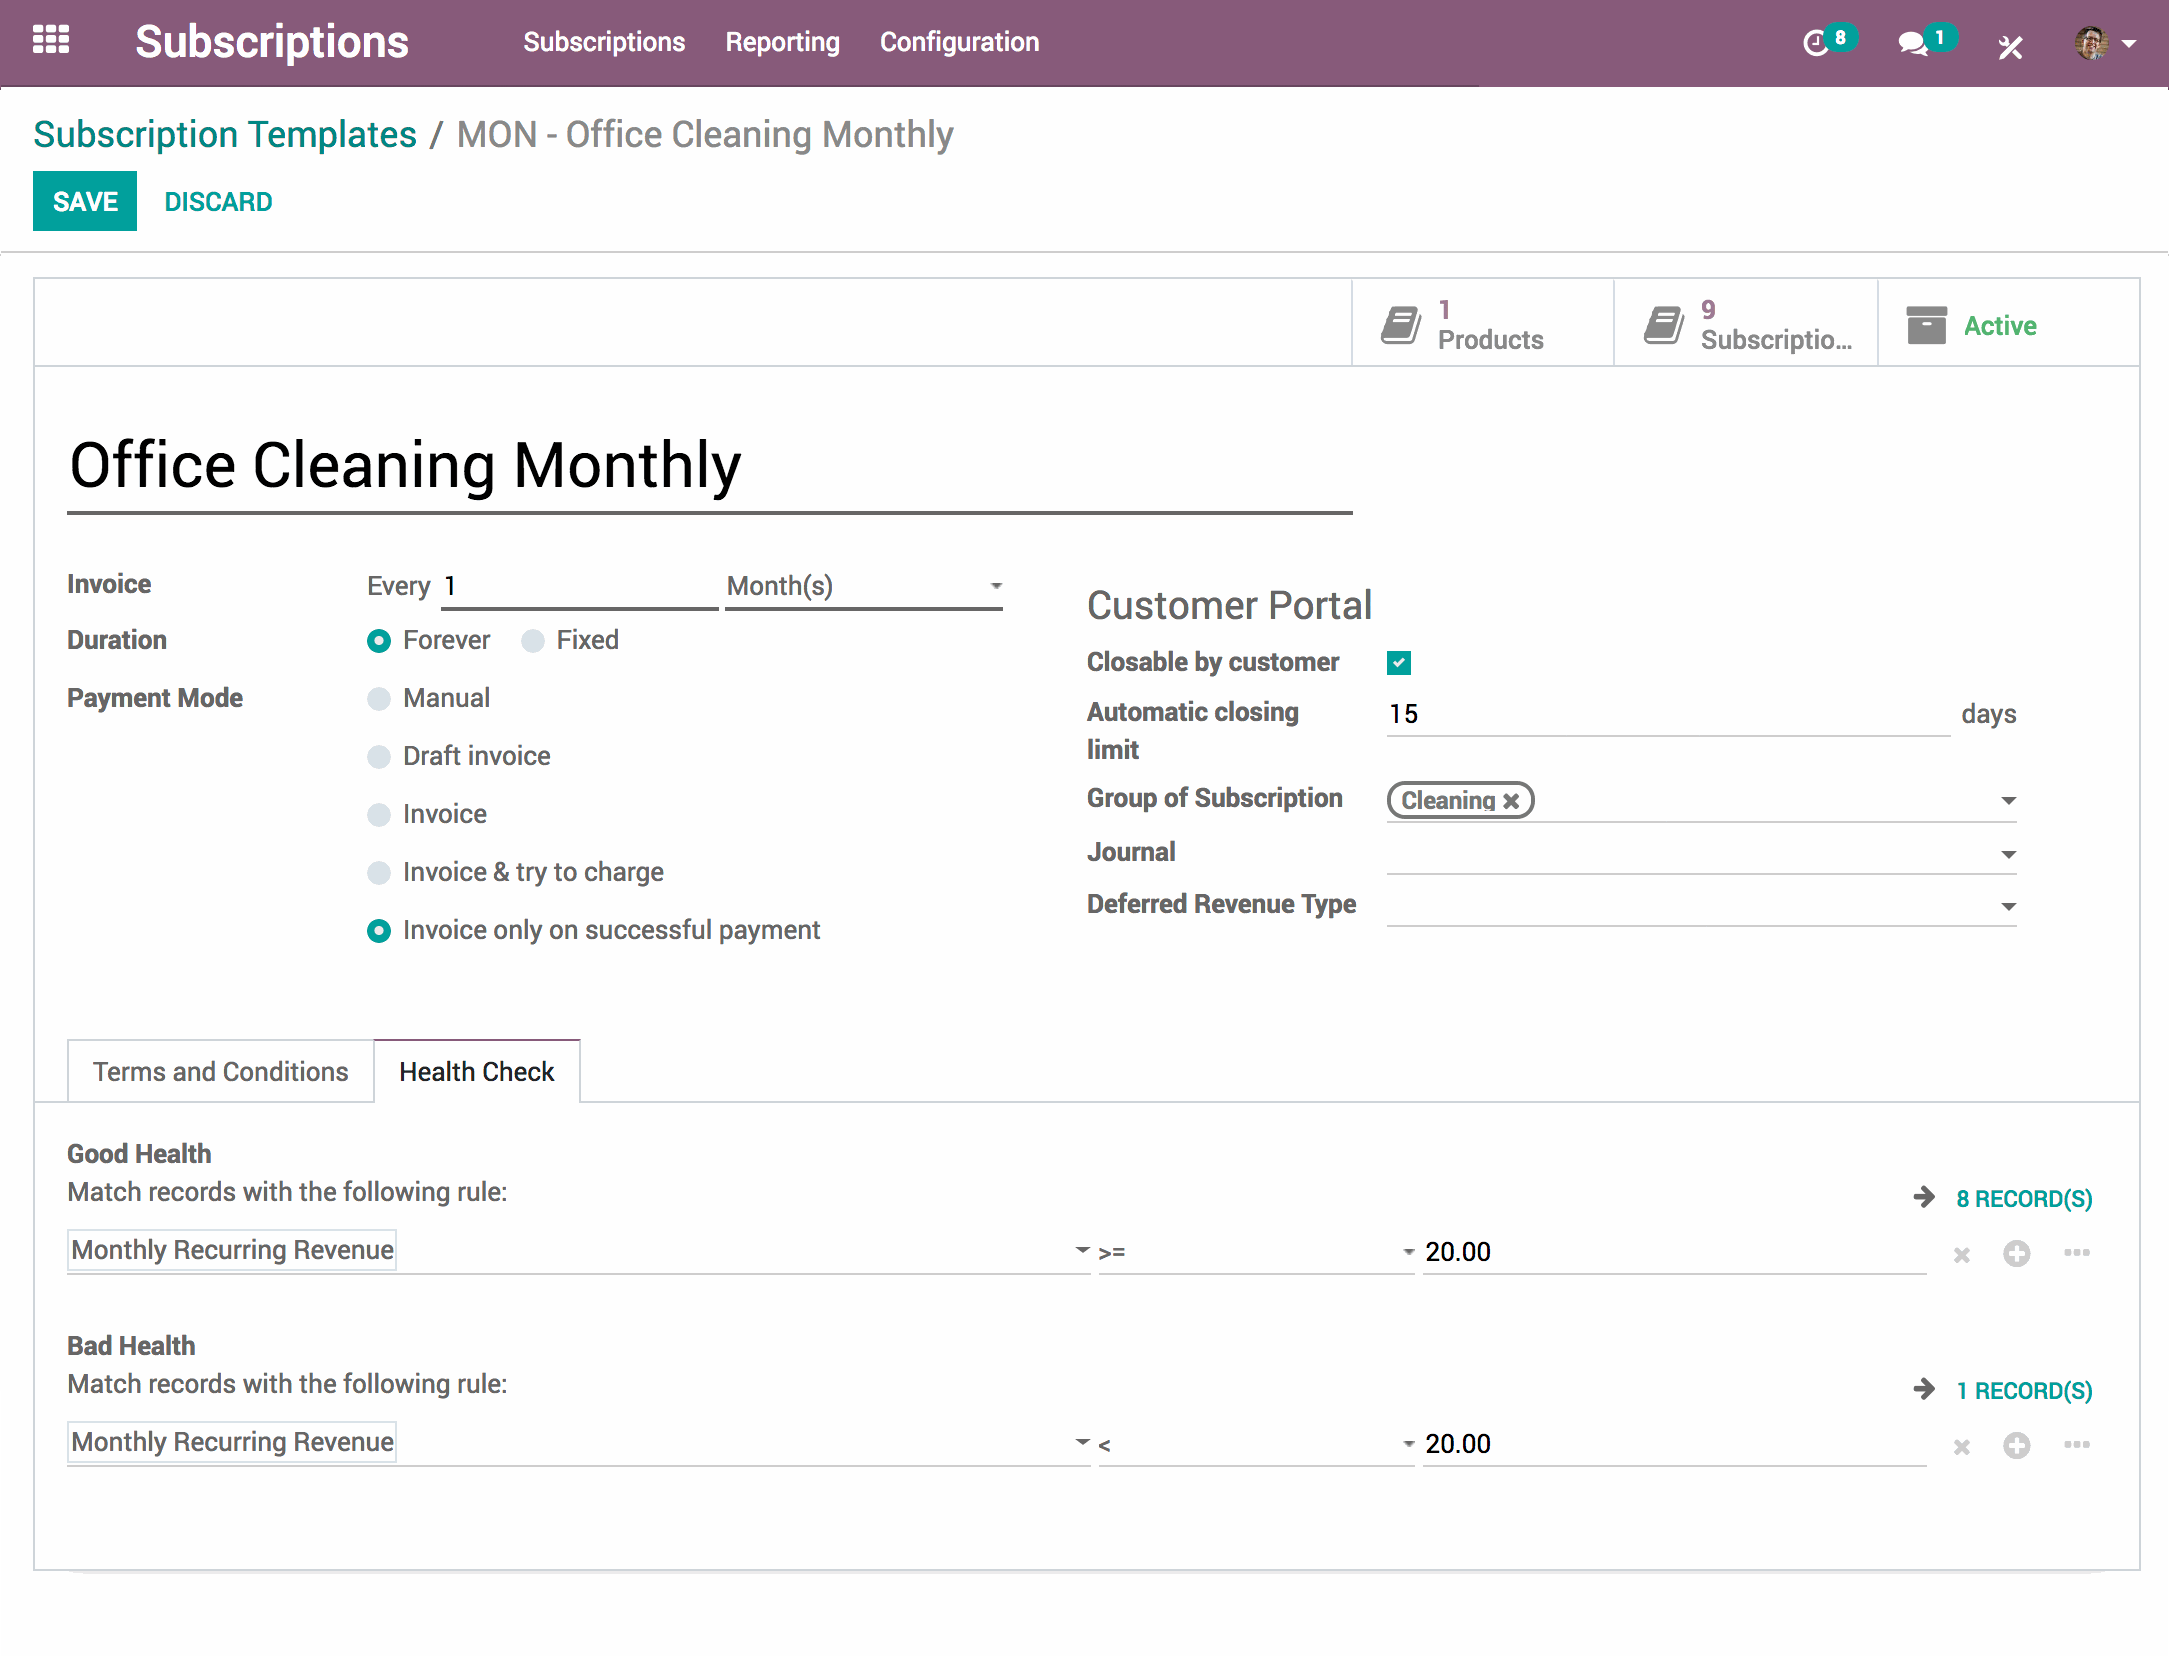 Odoo Subscriptions interface setting up a subscription